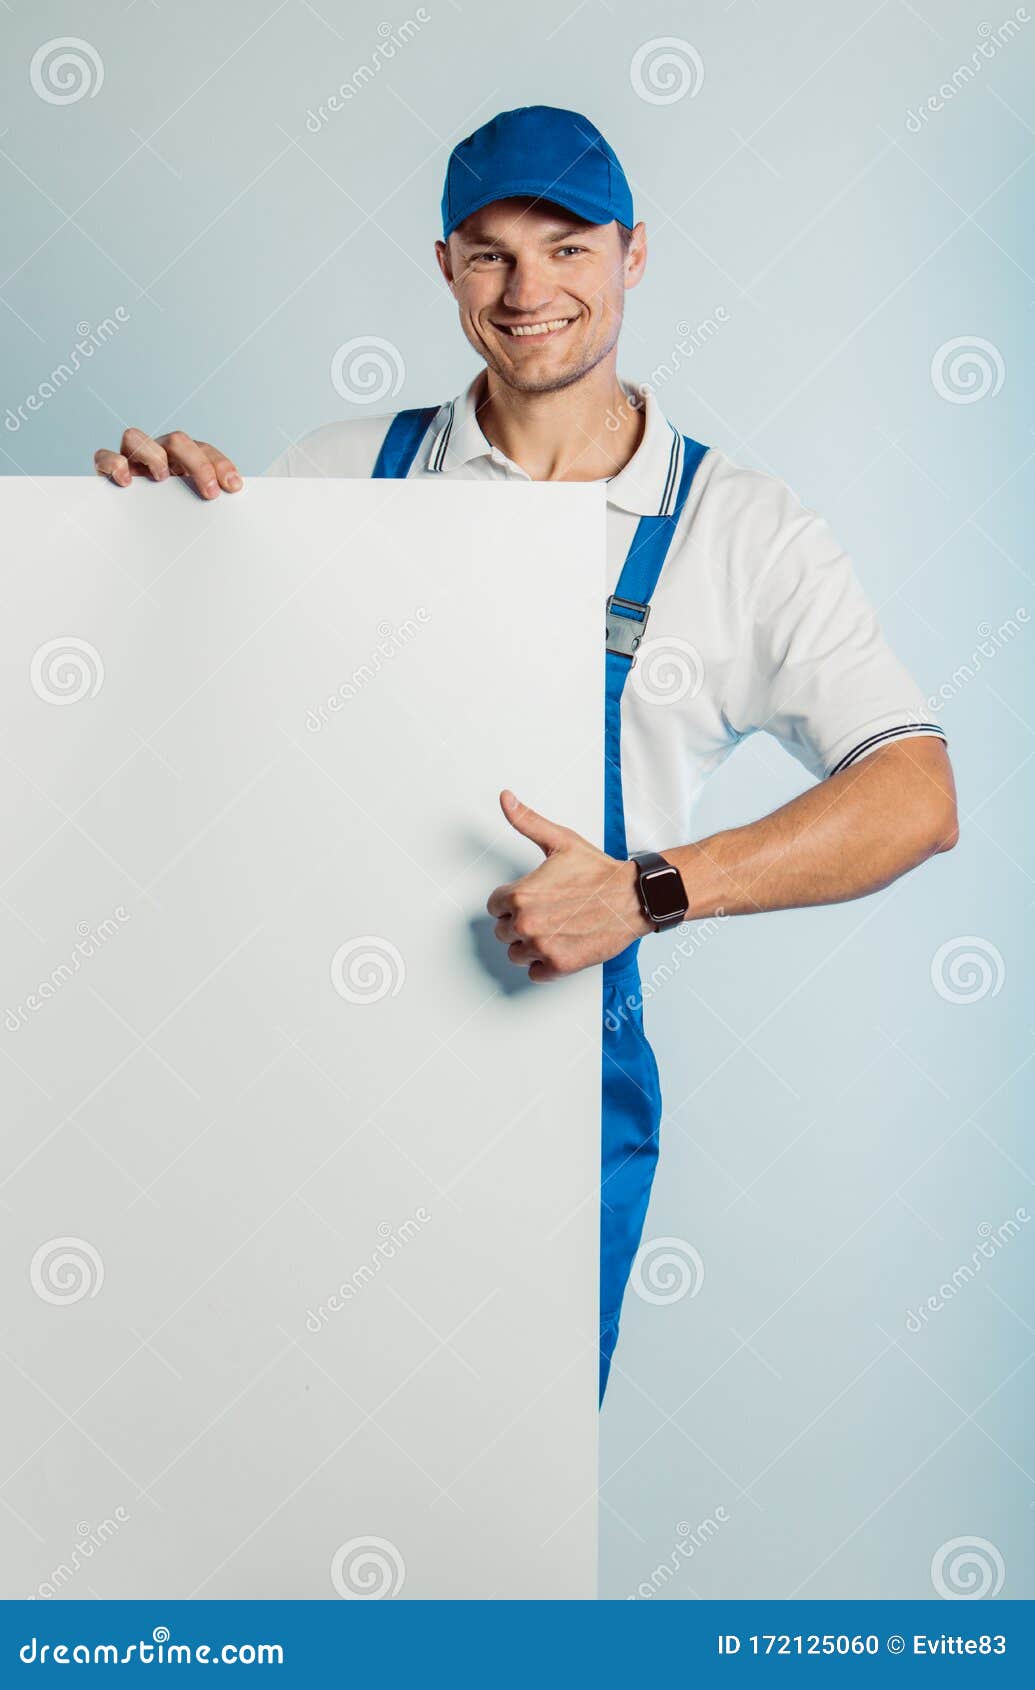 Download Mockup Of Smiling Young Worker Man Wearing Blue Uniform ...